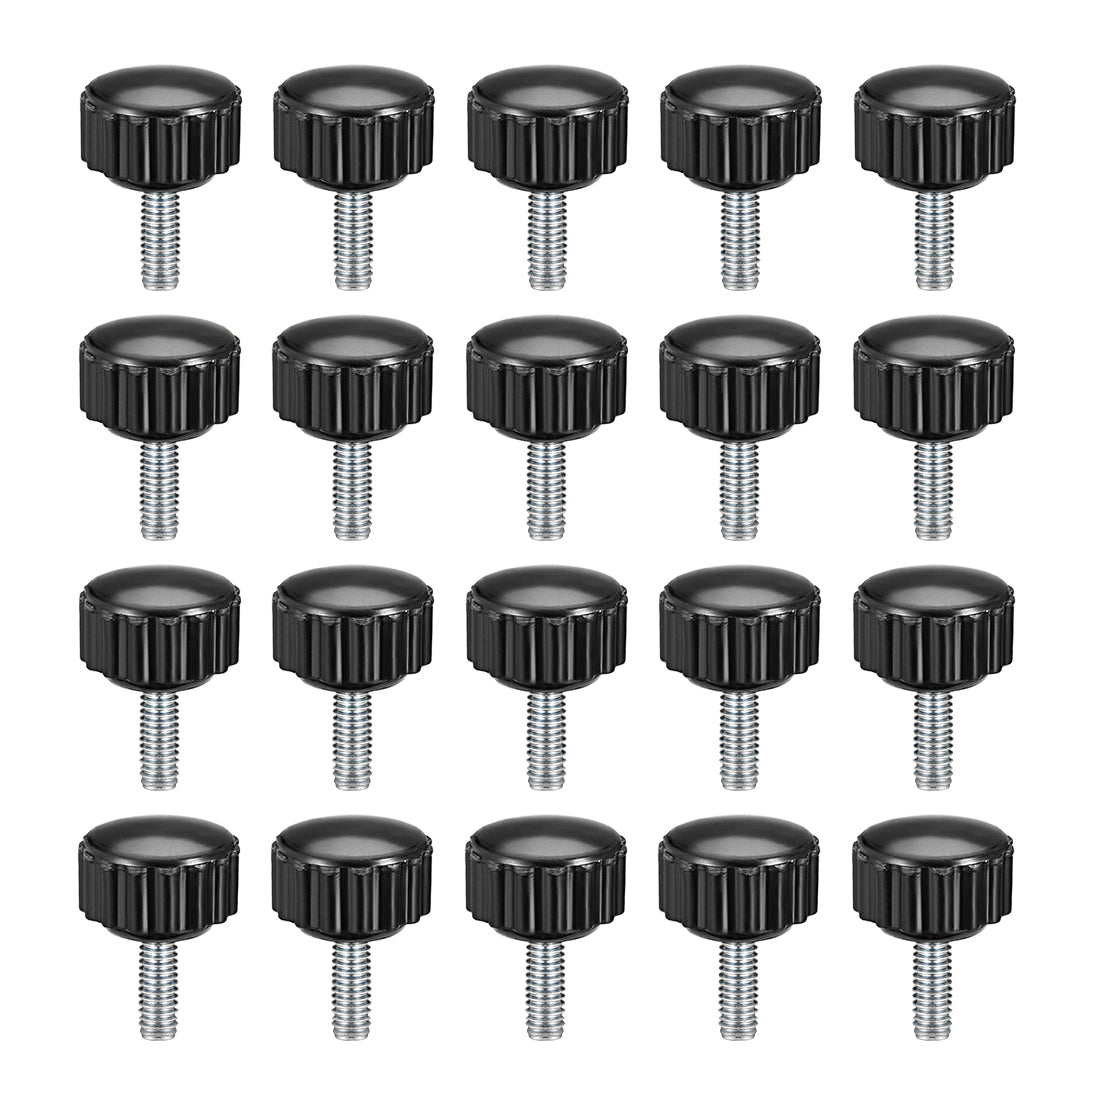 uxcell Uxcell M4 x 10mm Male Thread Knurled Clamping Knobs Grip Thumb Screw on Type 20 Pcs